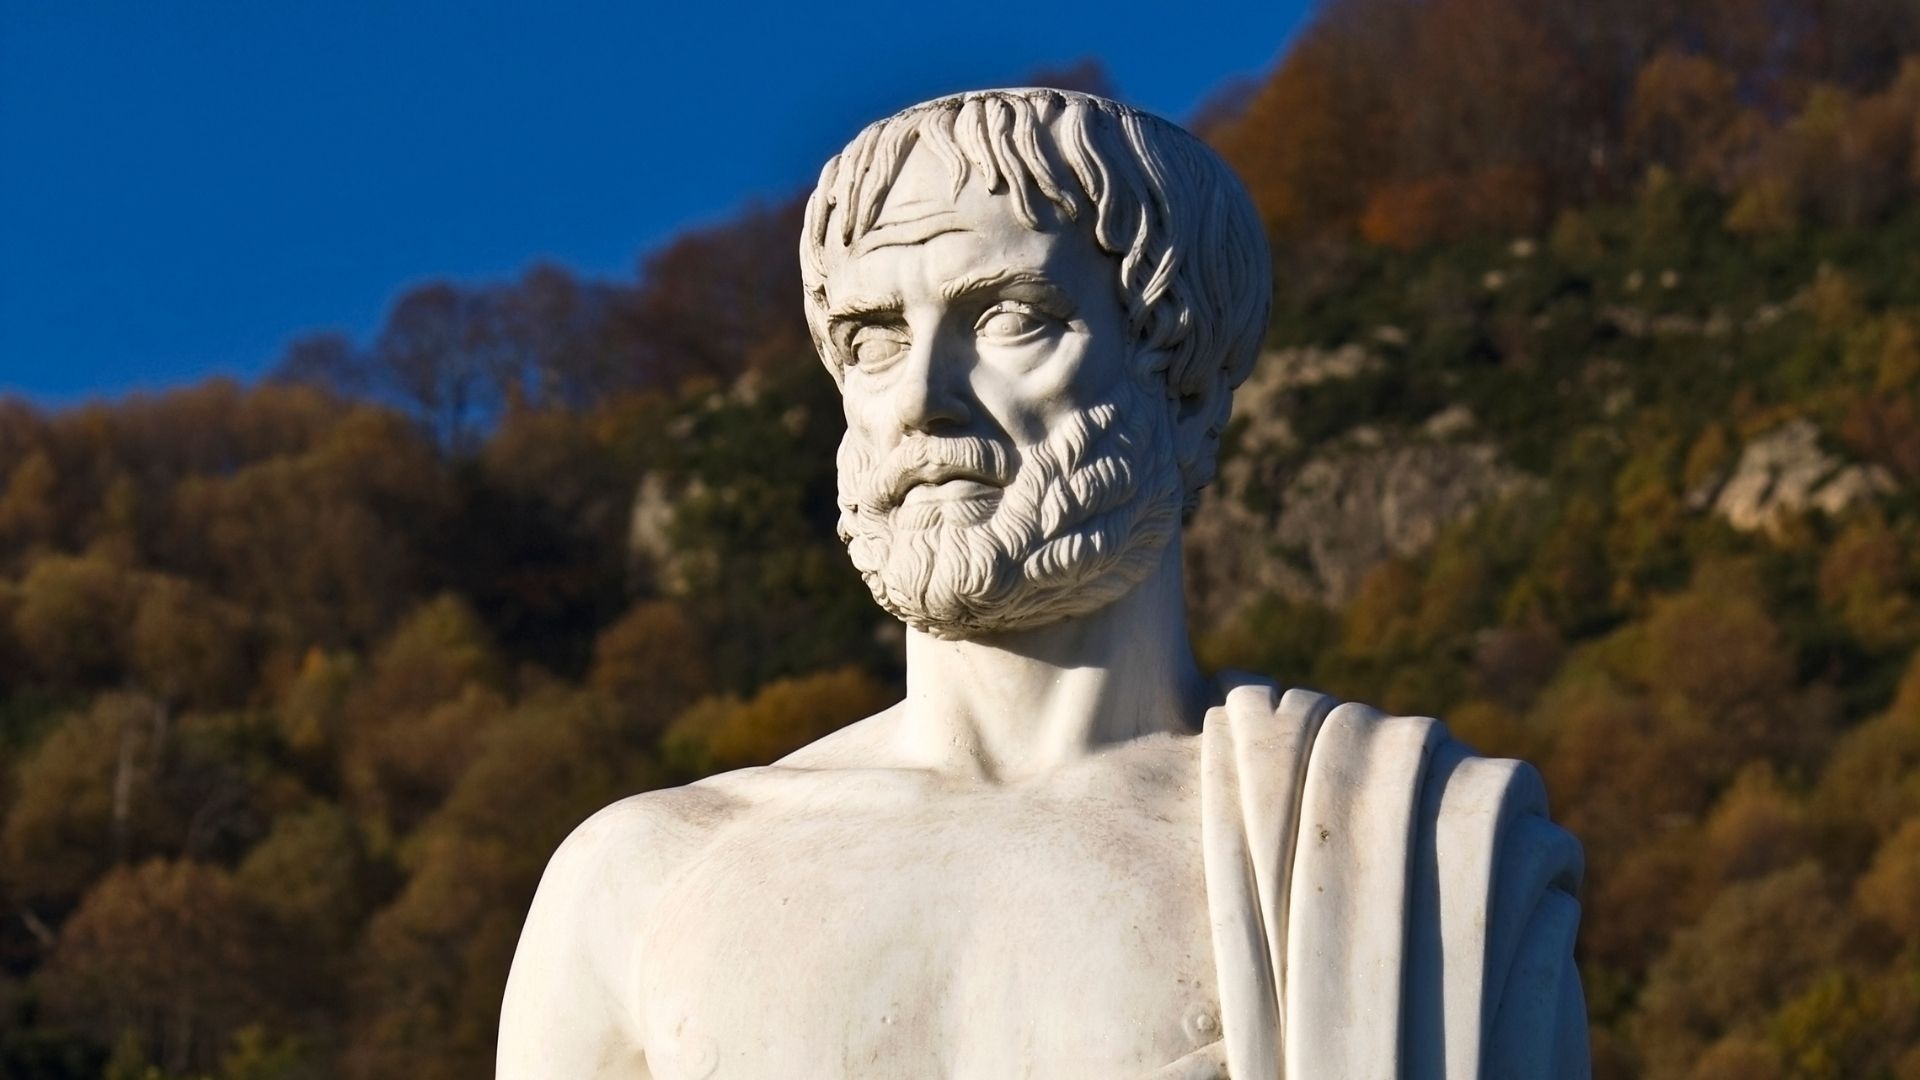 Aristotle, Knowledge acquisition, Educational resources, Language learning, 1920x1080 Full HD Desktop